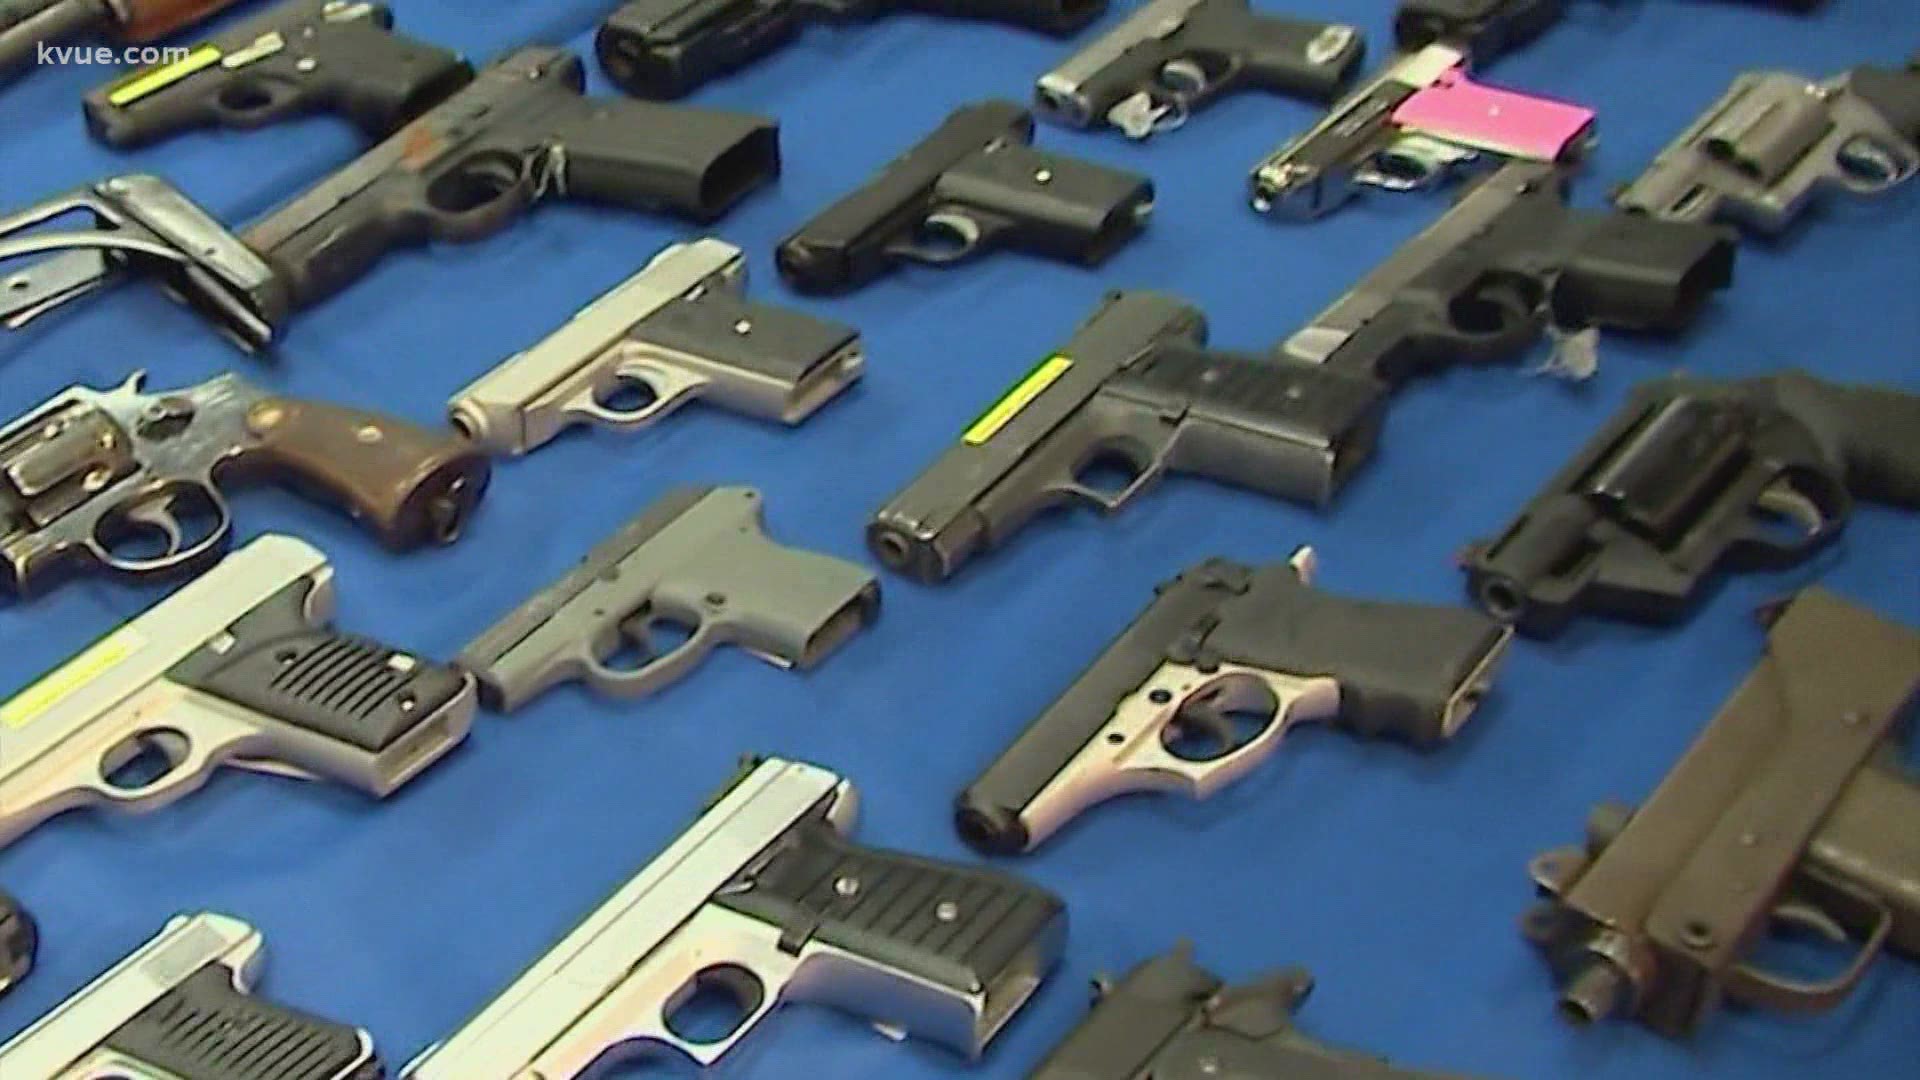 Texas is one step closer to allowing permitless carry of handguns.